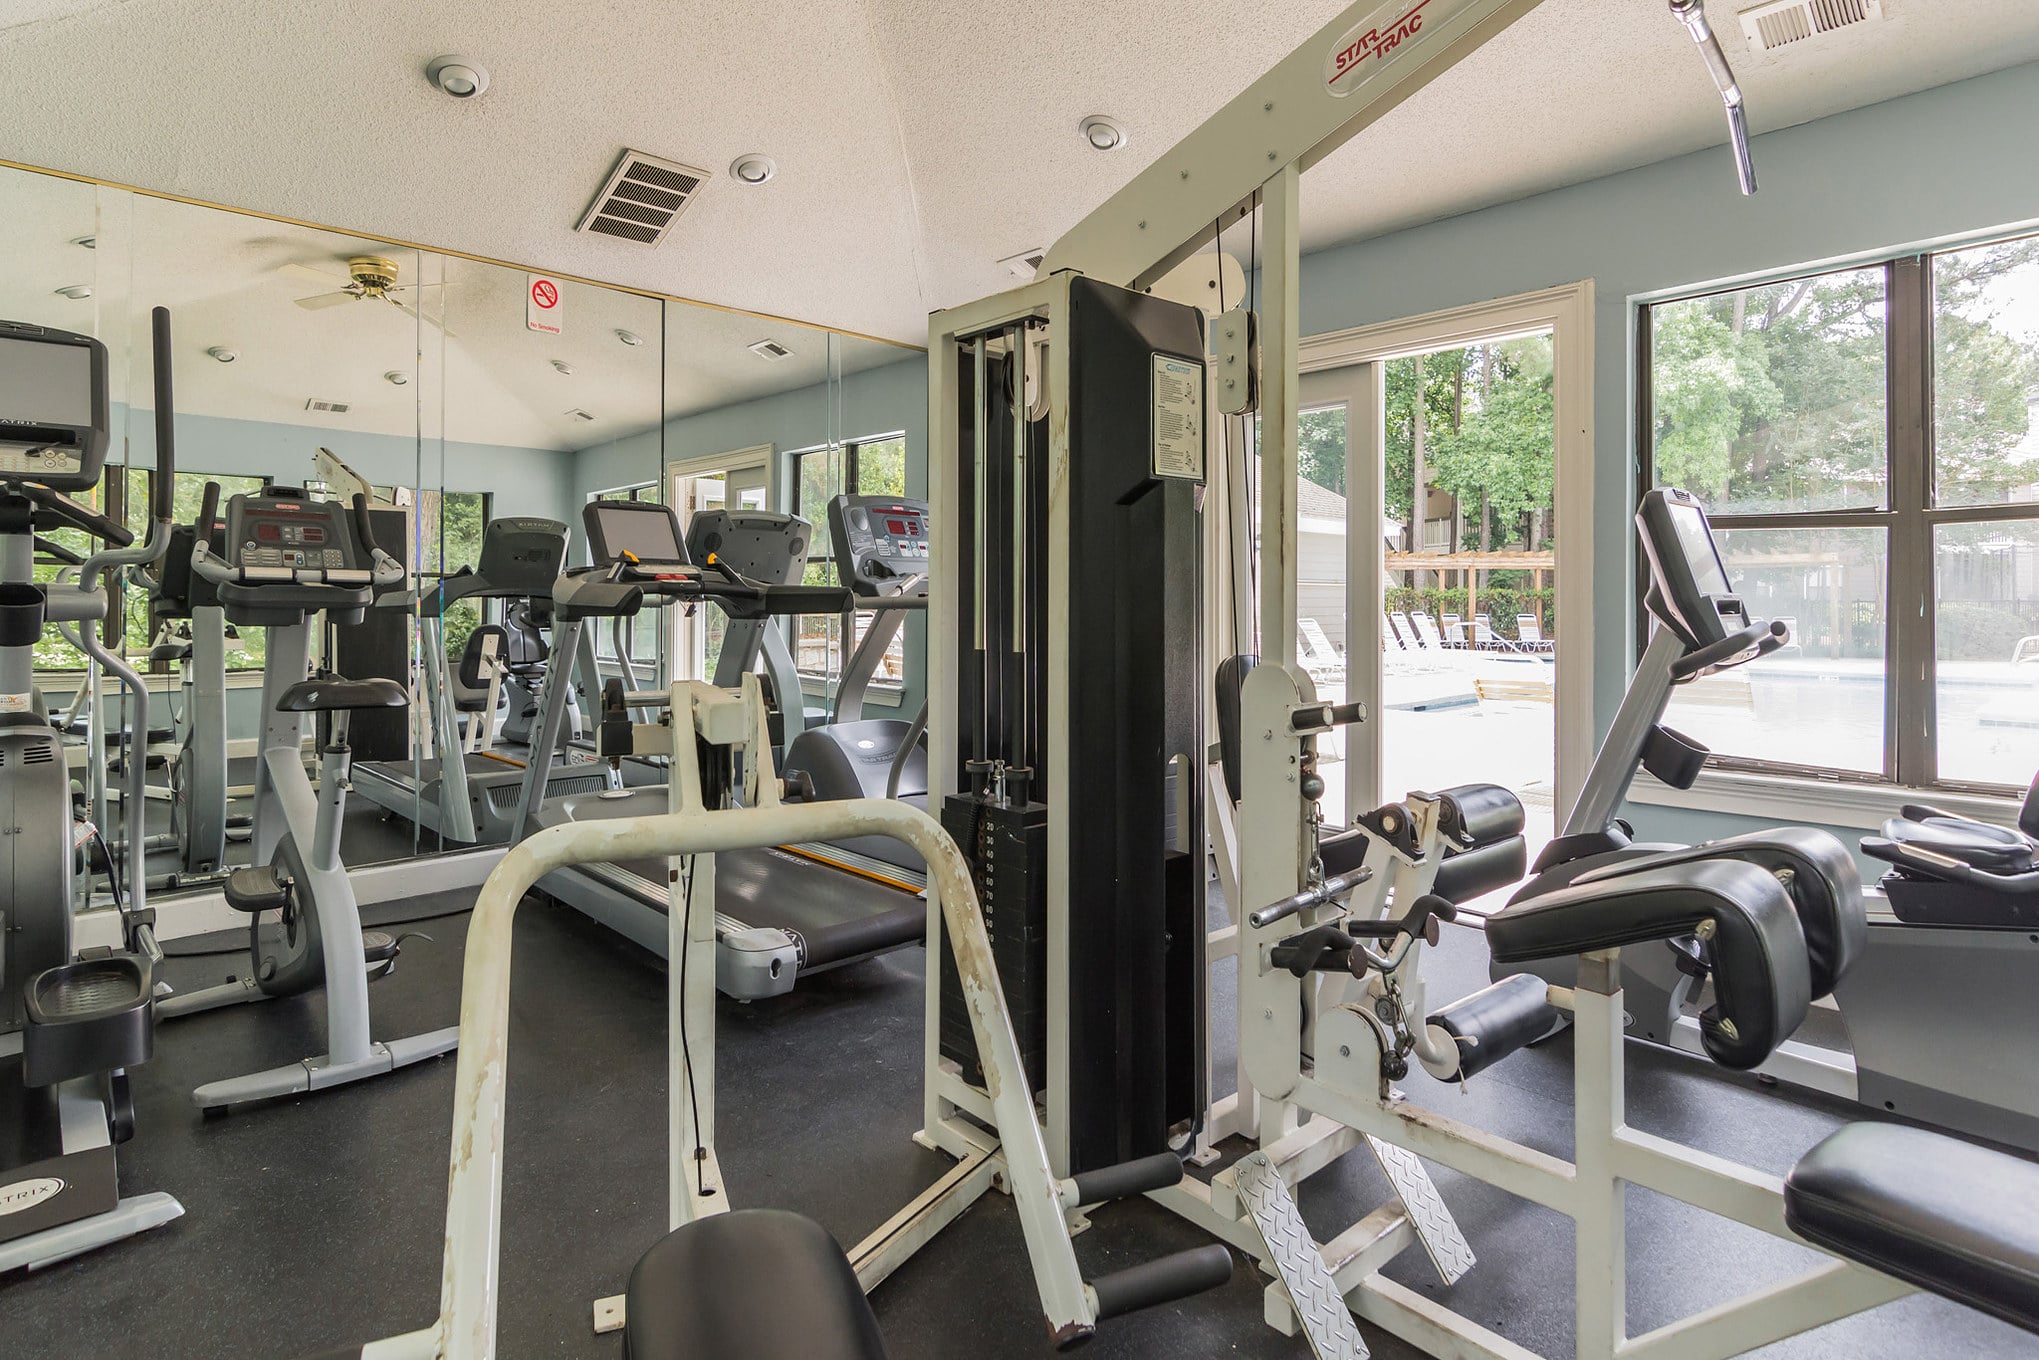 A gym room with exercise equipment and mirrors, located within a Two Bedroom Apartment.